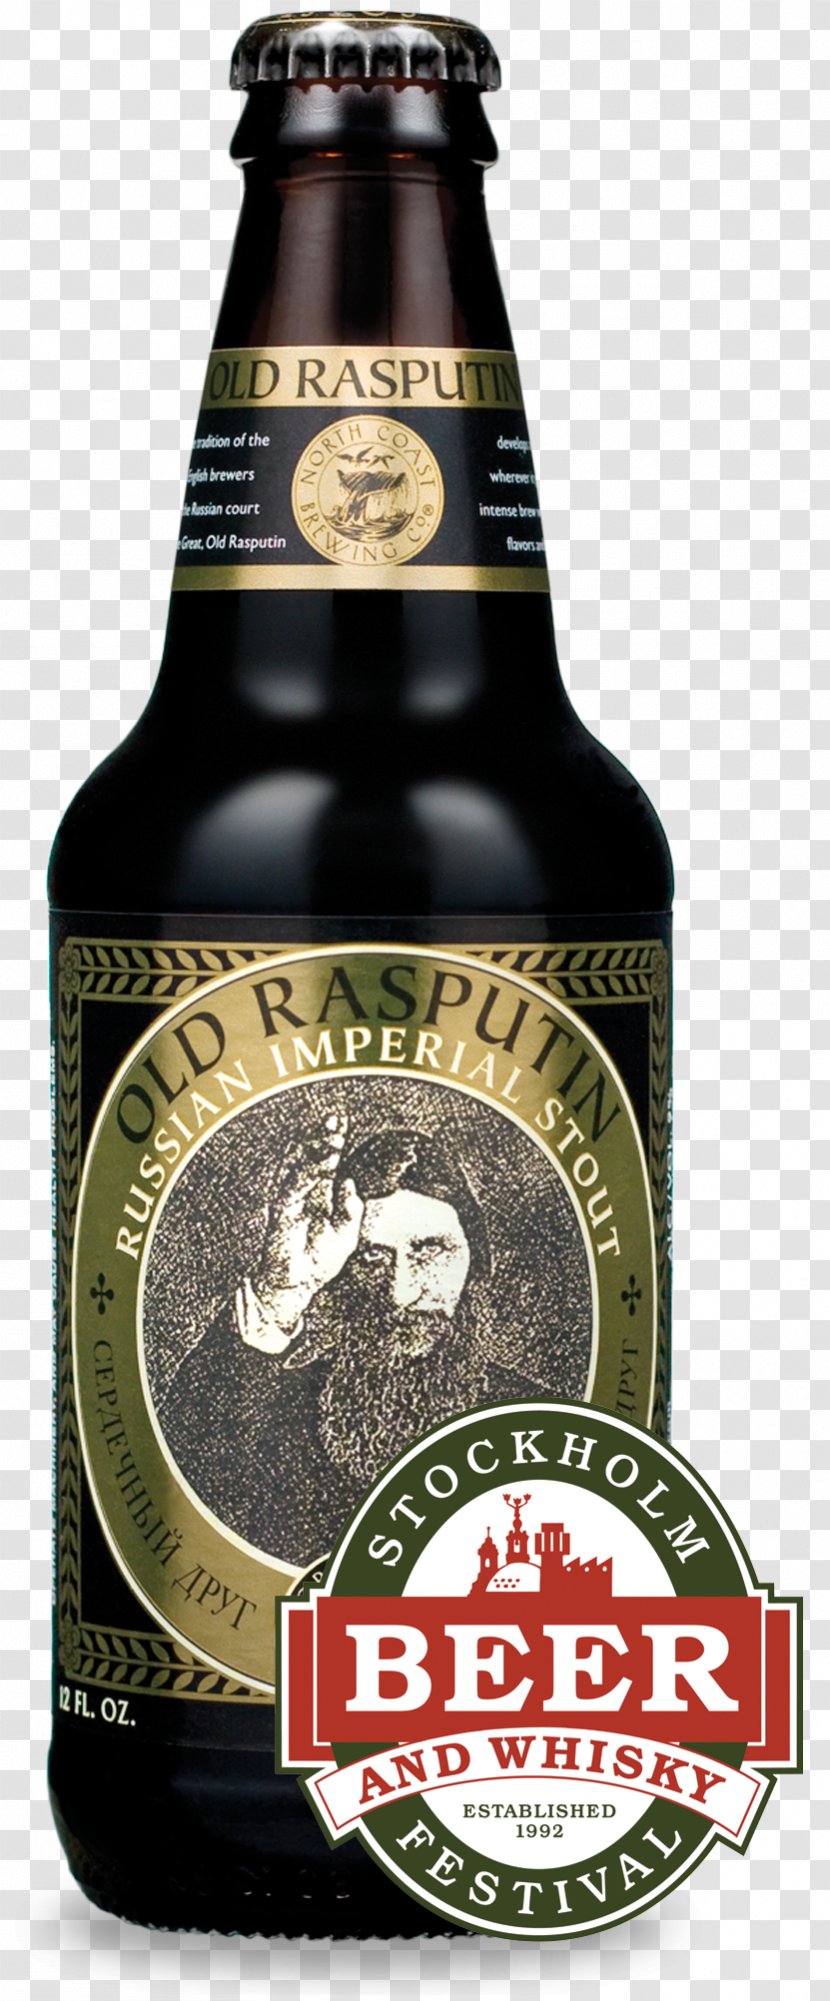 North Coast Brewing Company Old Rasputin Russian Imperial Stout Beer Ale - Bottle Transparent PNG